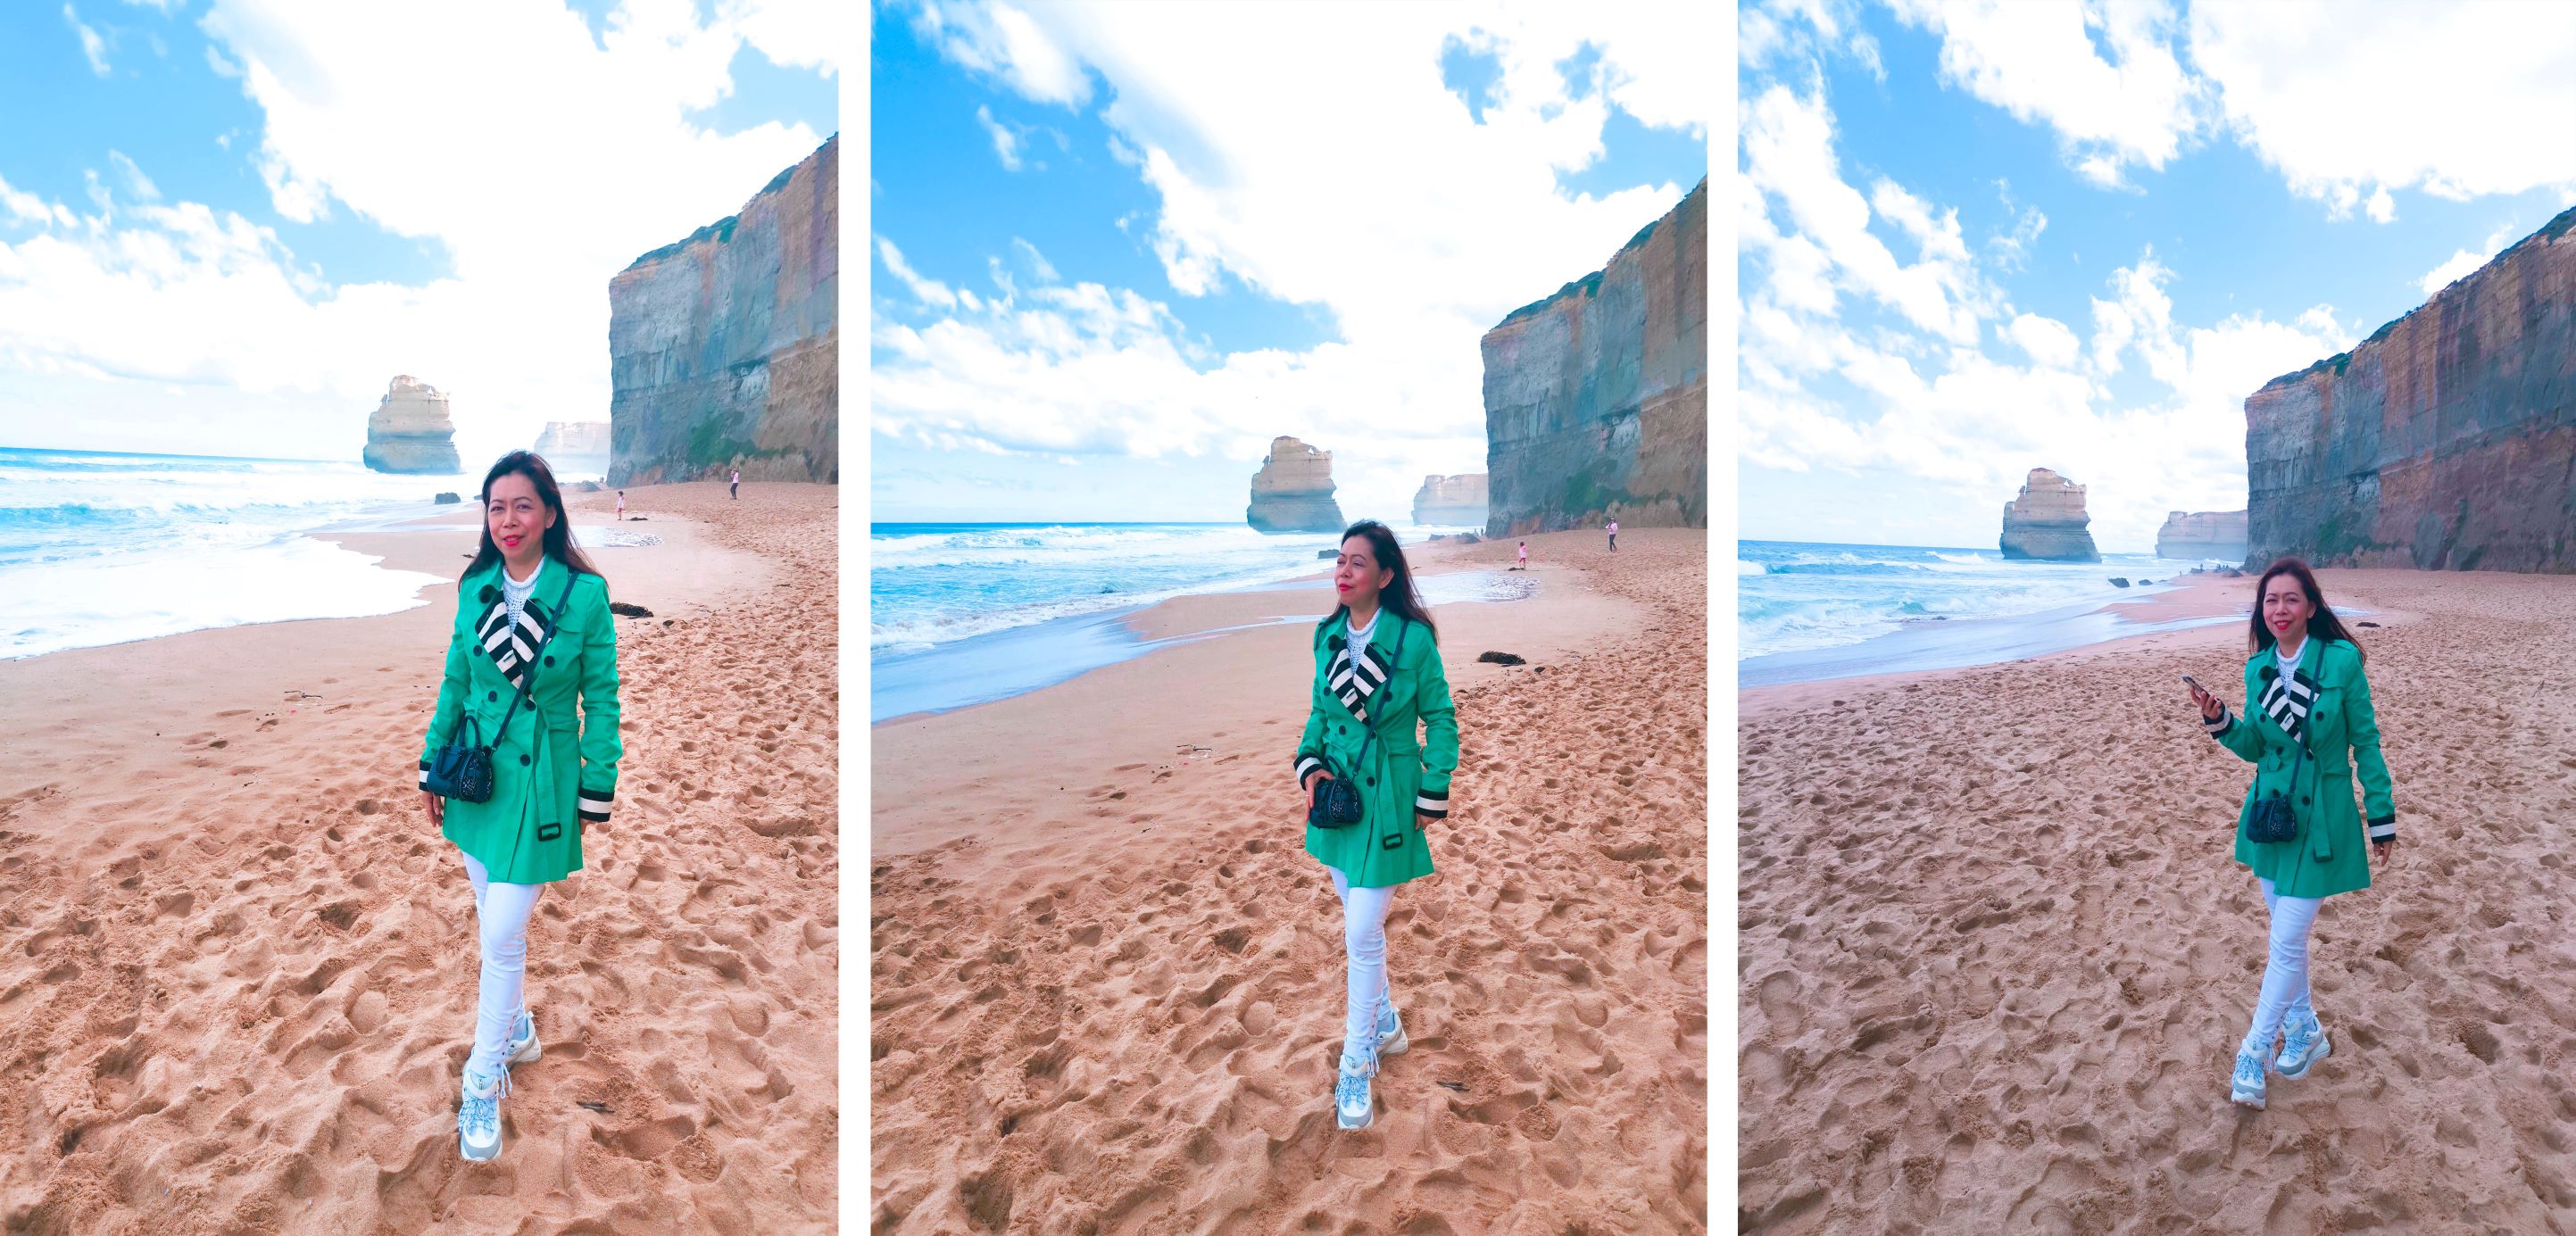 What to do in the great ocean road